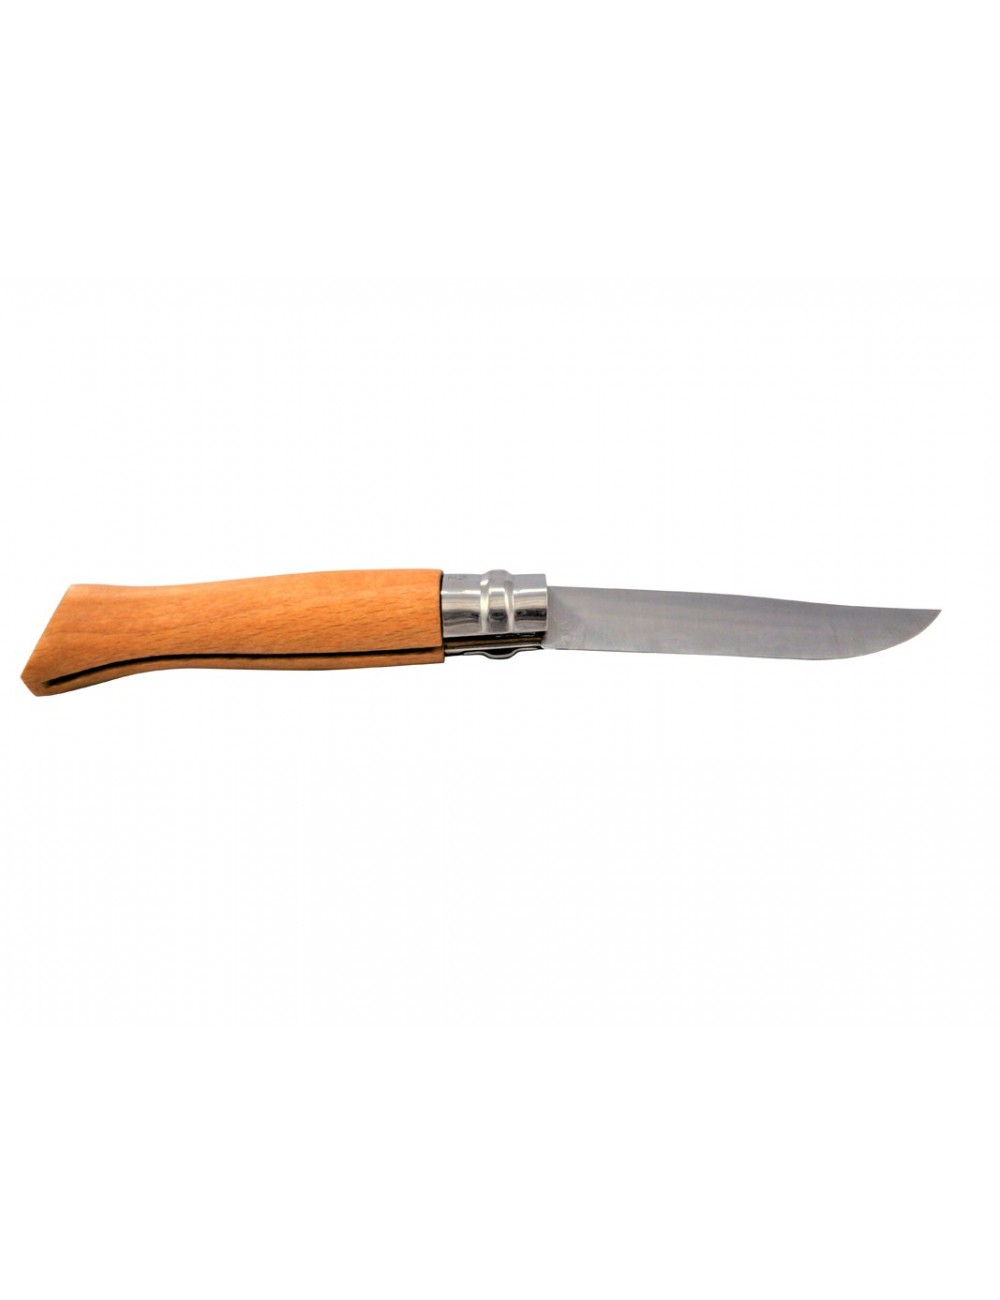 OPINEL NO. 9 KNIFE - CARBON